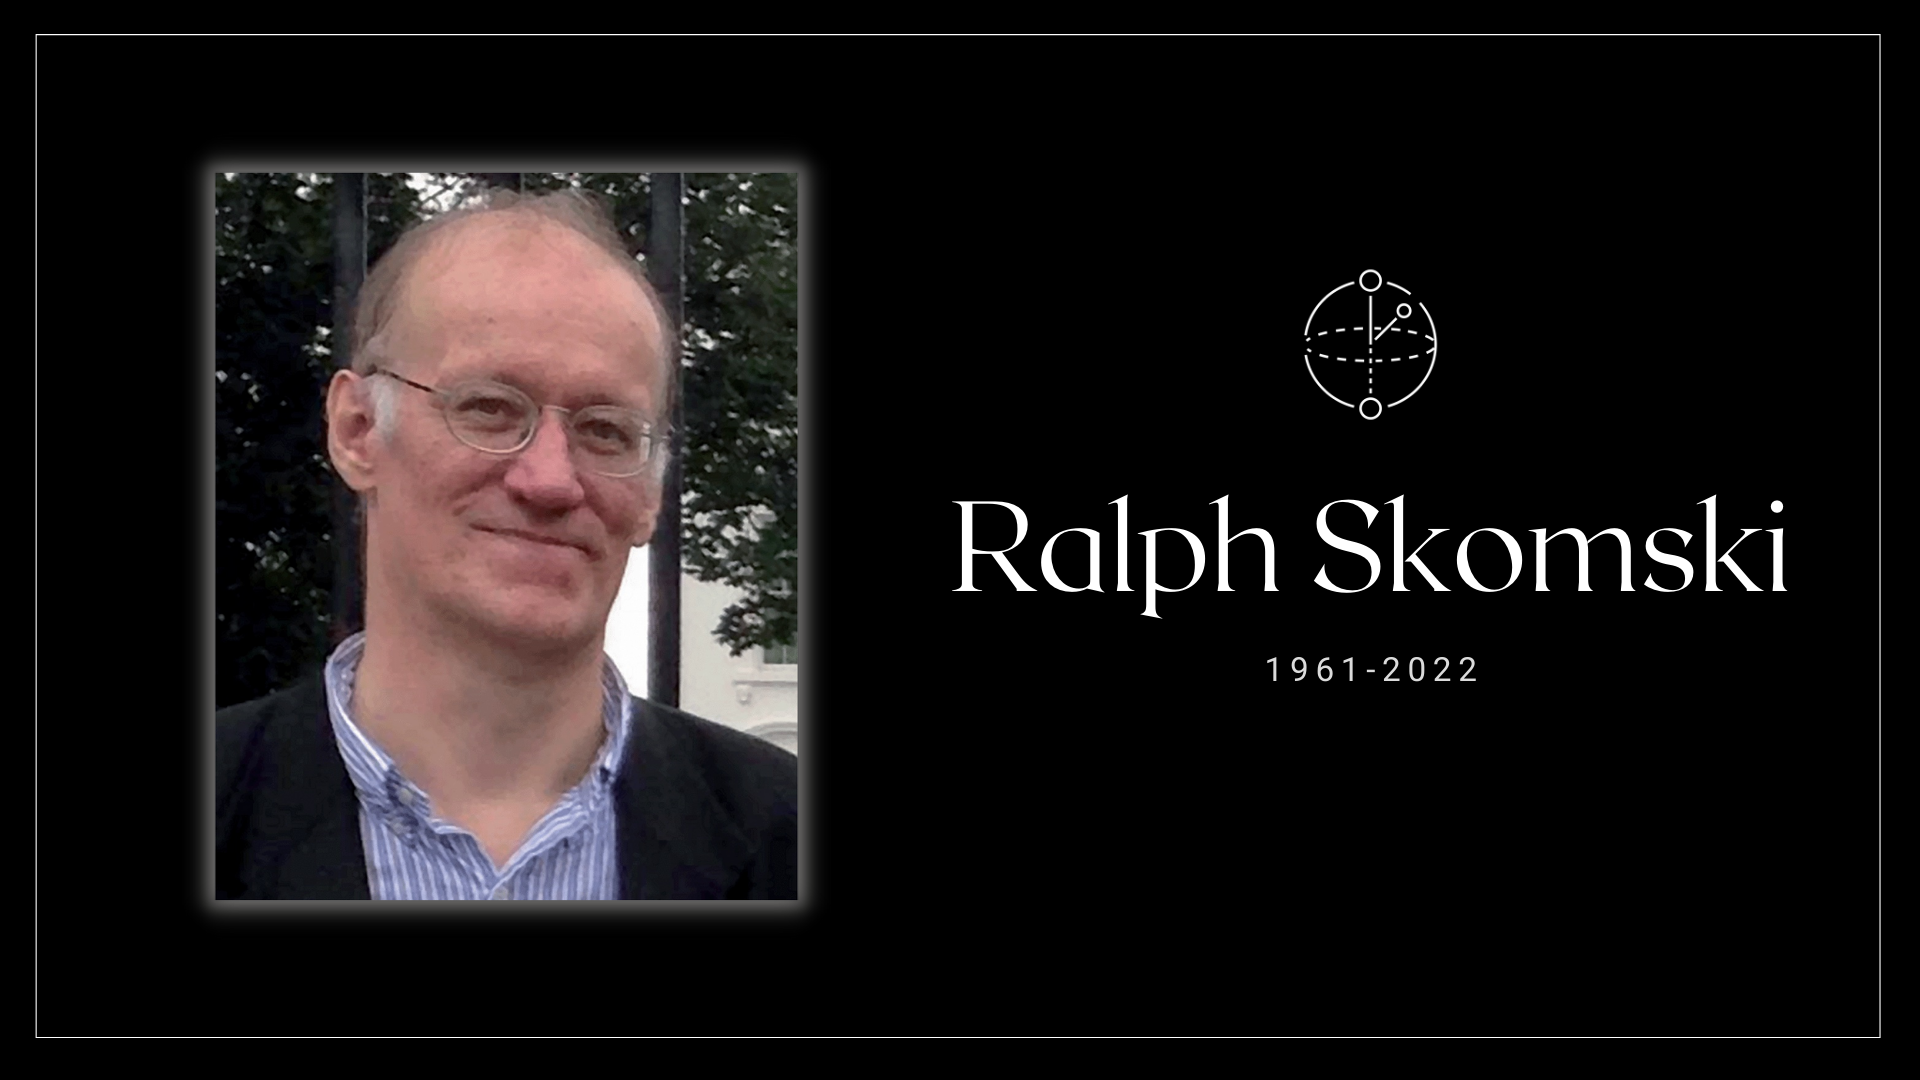 Image of Ralph Skomskii on a black groundground, with white text stating his name and year of birth and death (1961-2022).